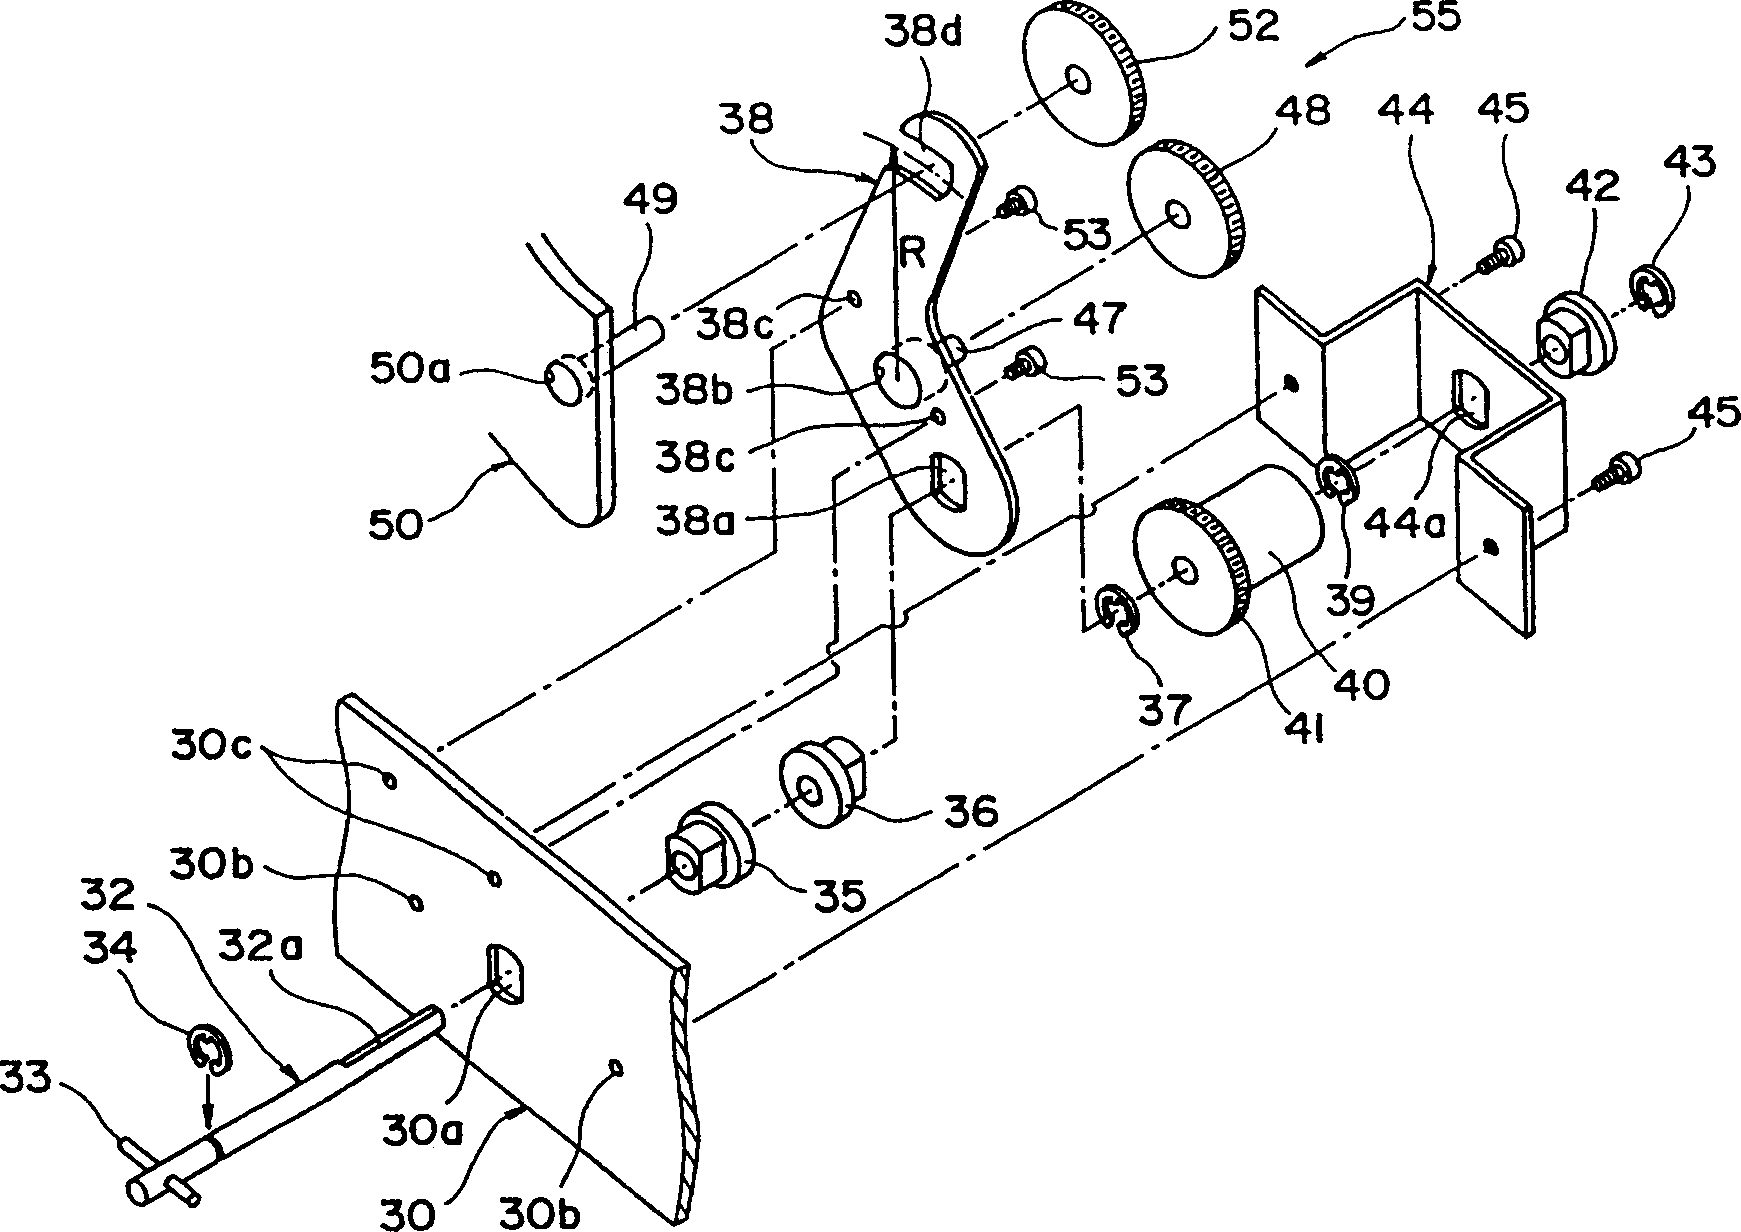 Image forming device and driving transmission device thereof